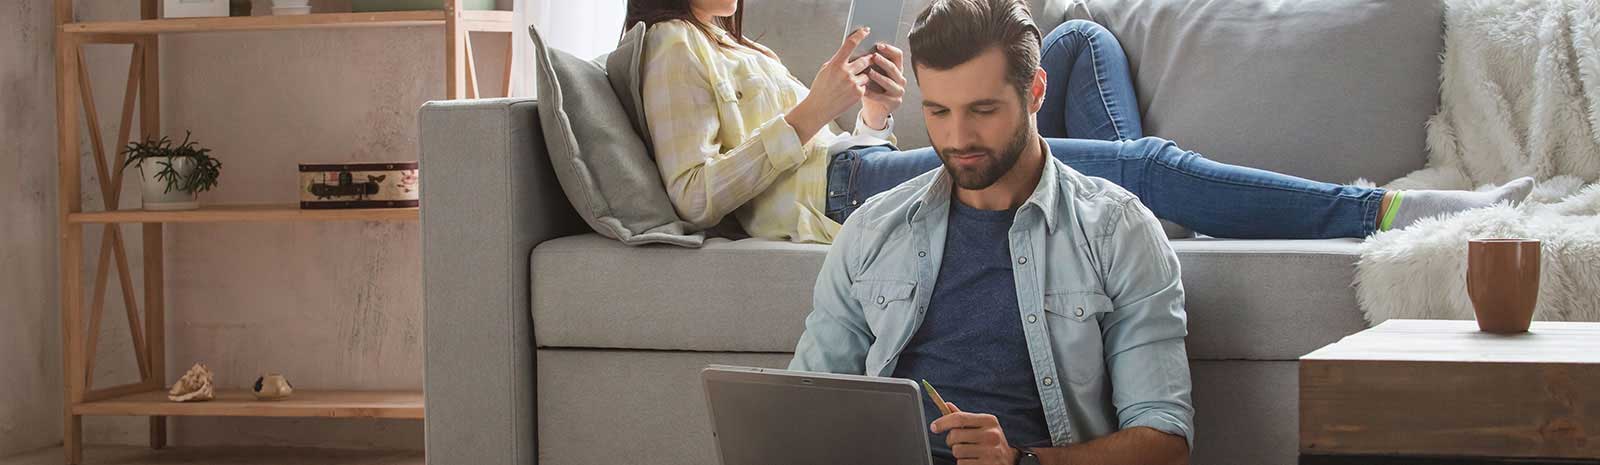 Man and woman relaxing while on a laptop and a mobile phone.